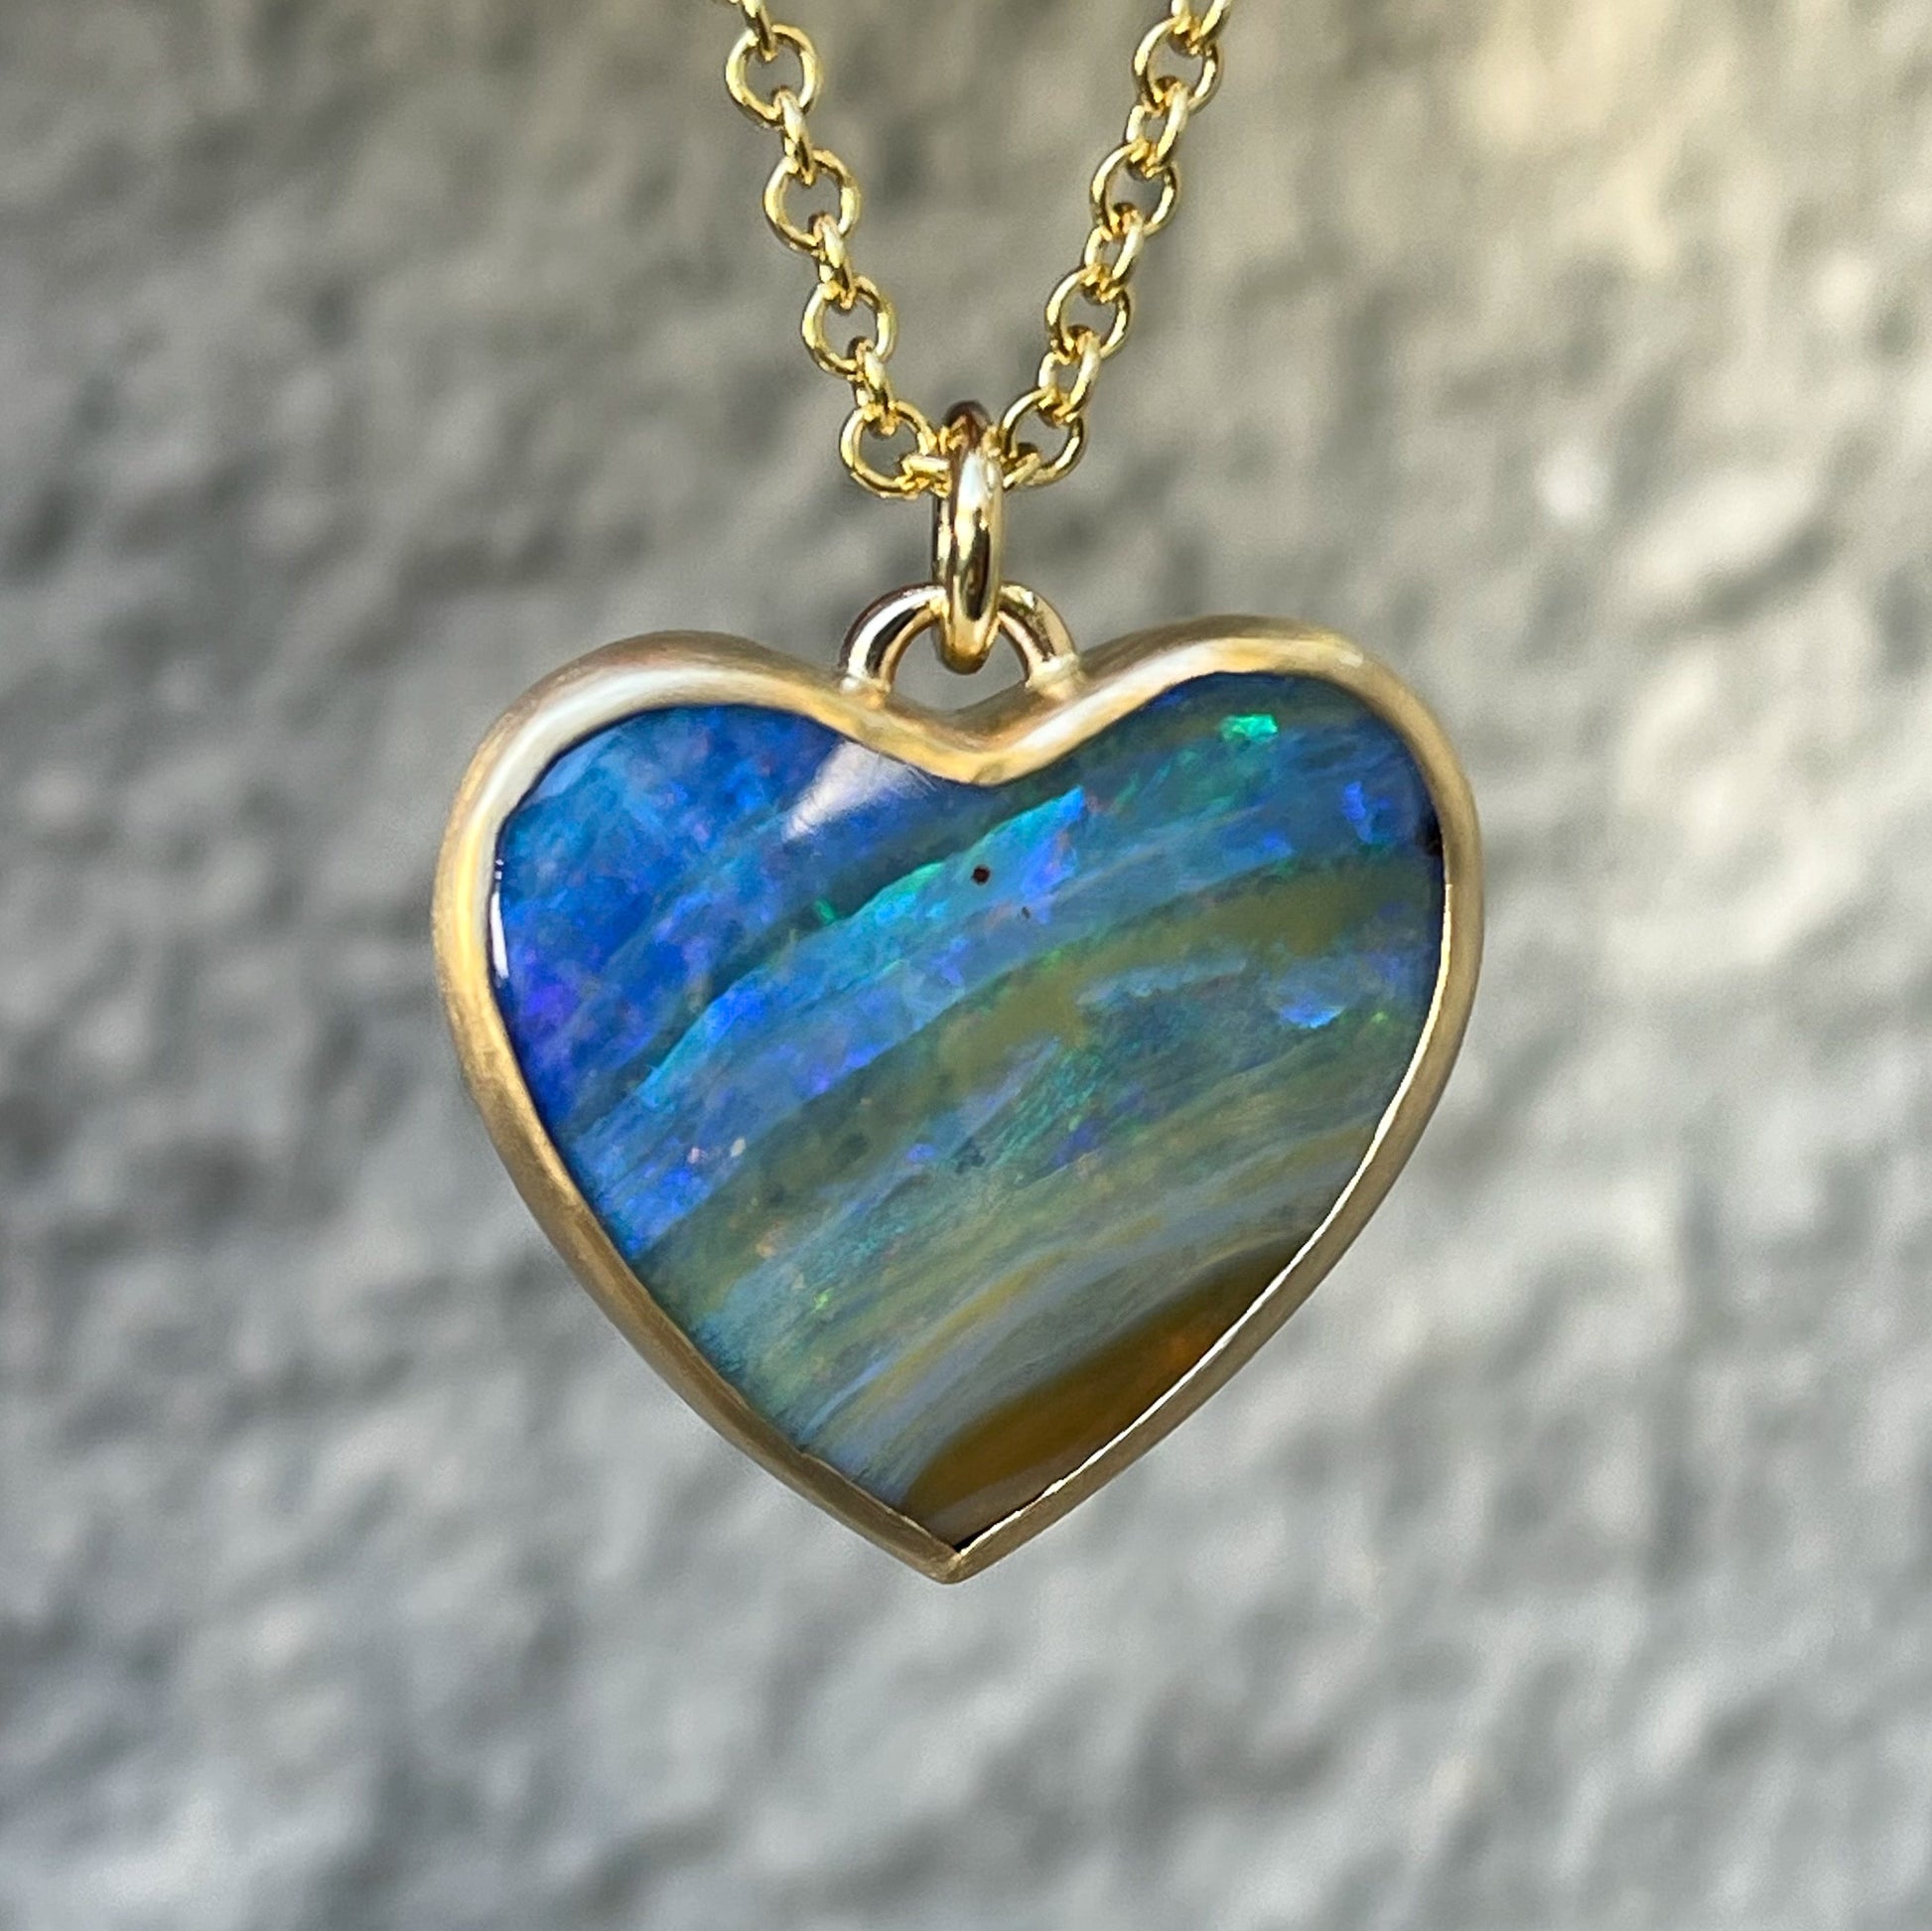 An Australian Opal Necklace by NIXIN Jewelry made in gold with a blue opal in a bezel setting.